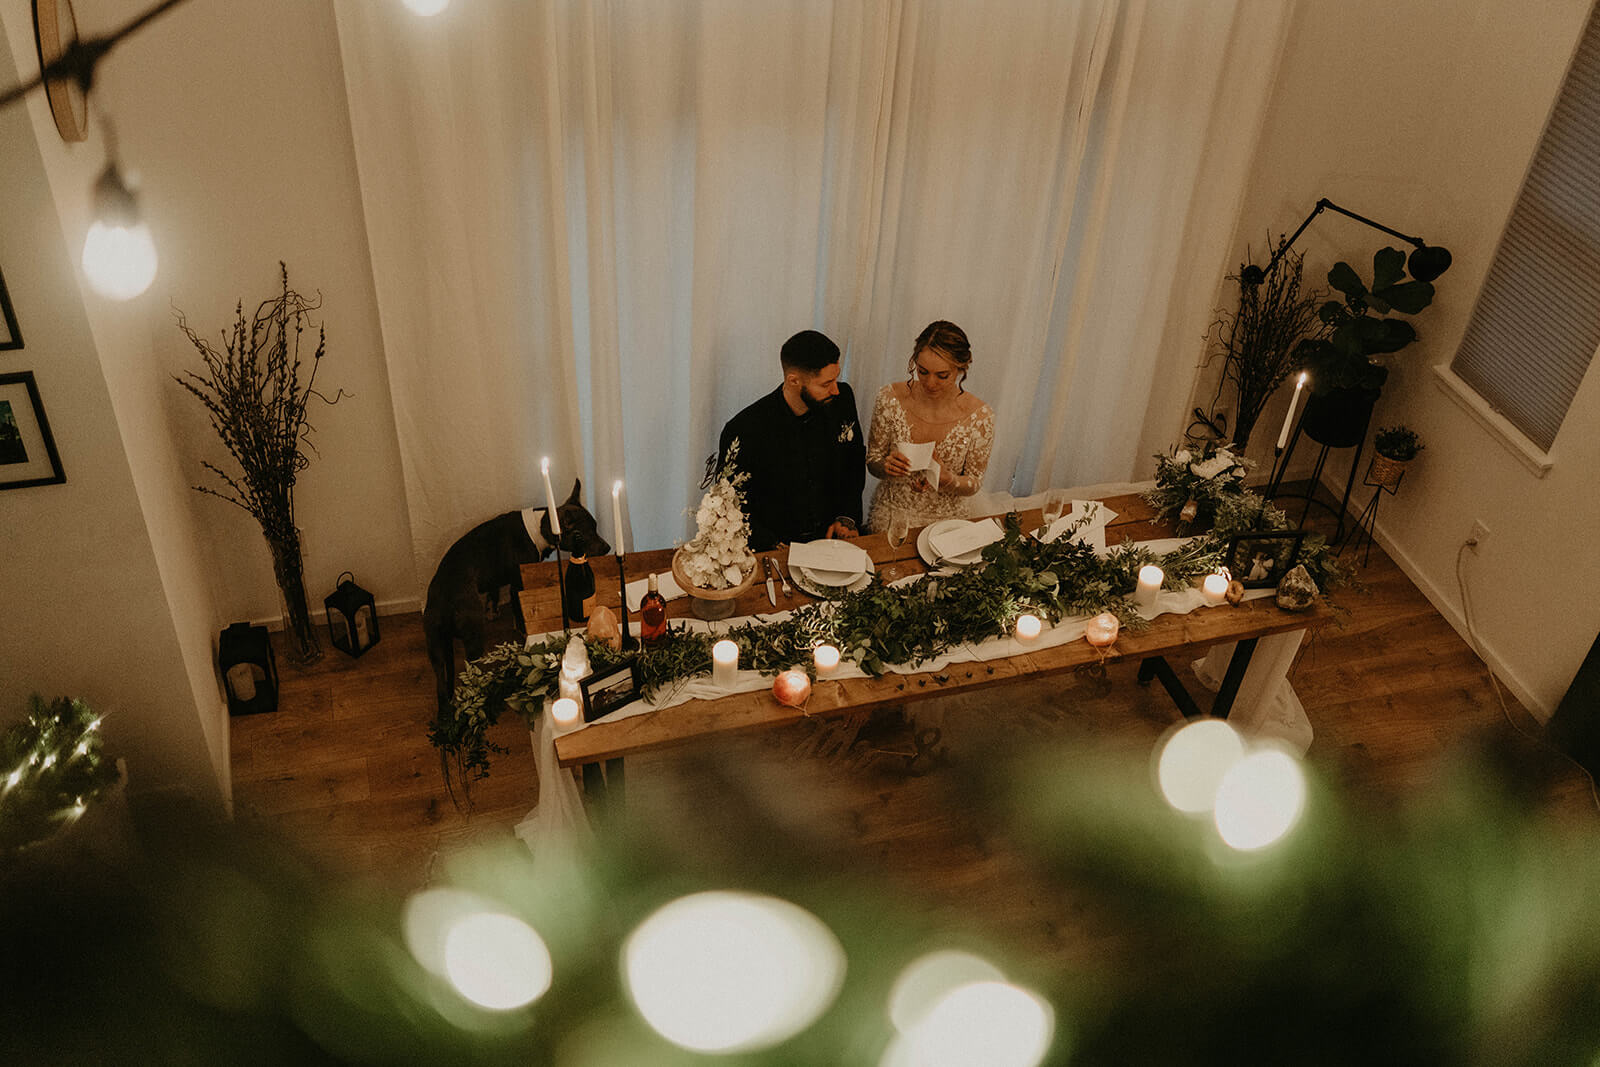 Bride and groom reading letters at the dining table in cozy cabin